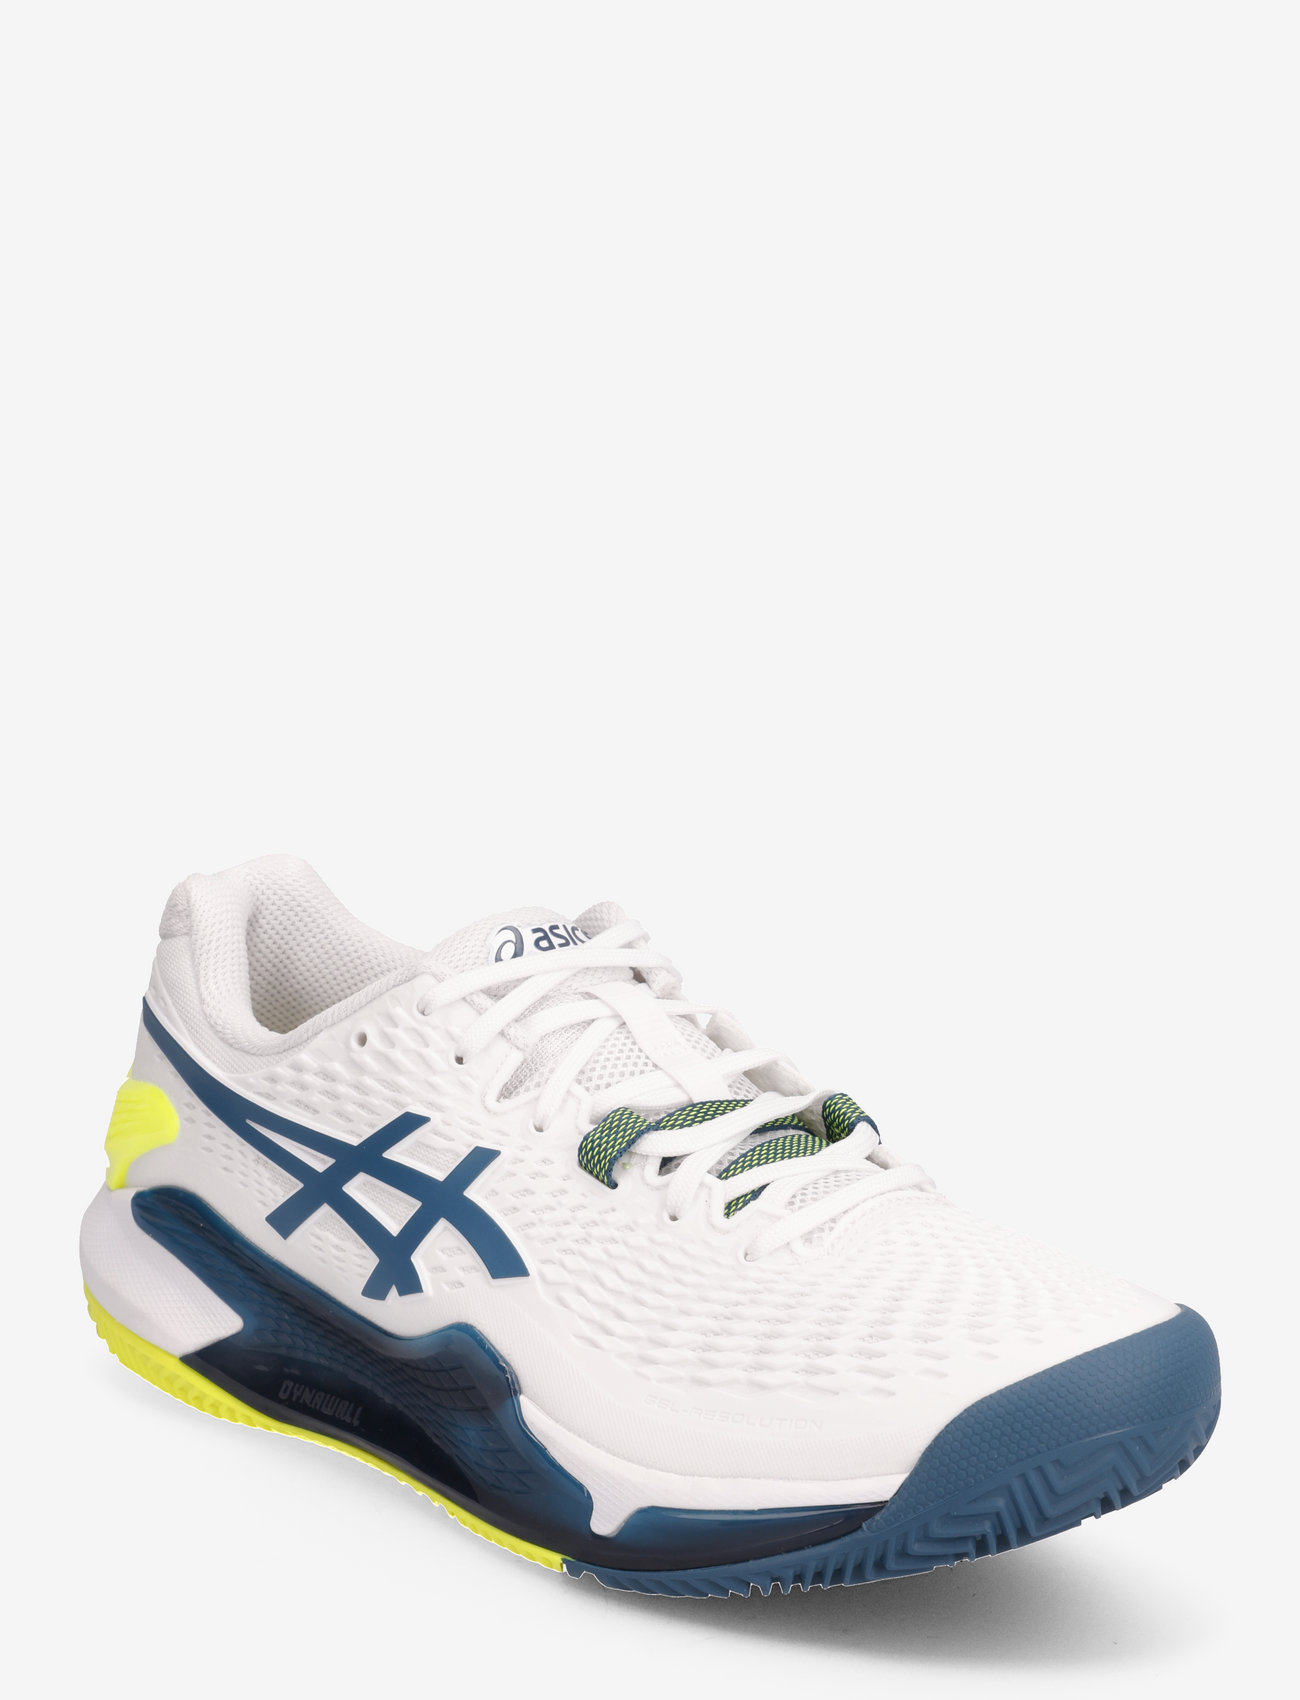 Asics - GEL-RESOLUTION 9 CLAY - racketsports shoes - white/restful teal - 0